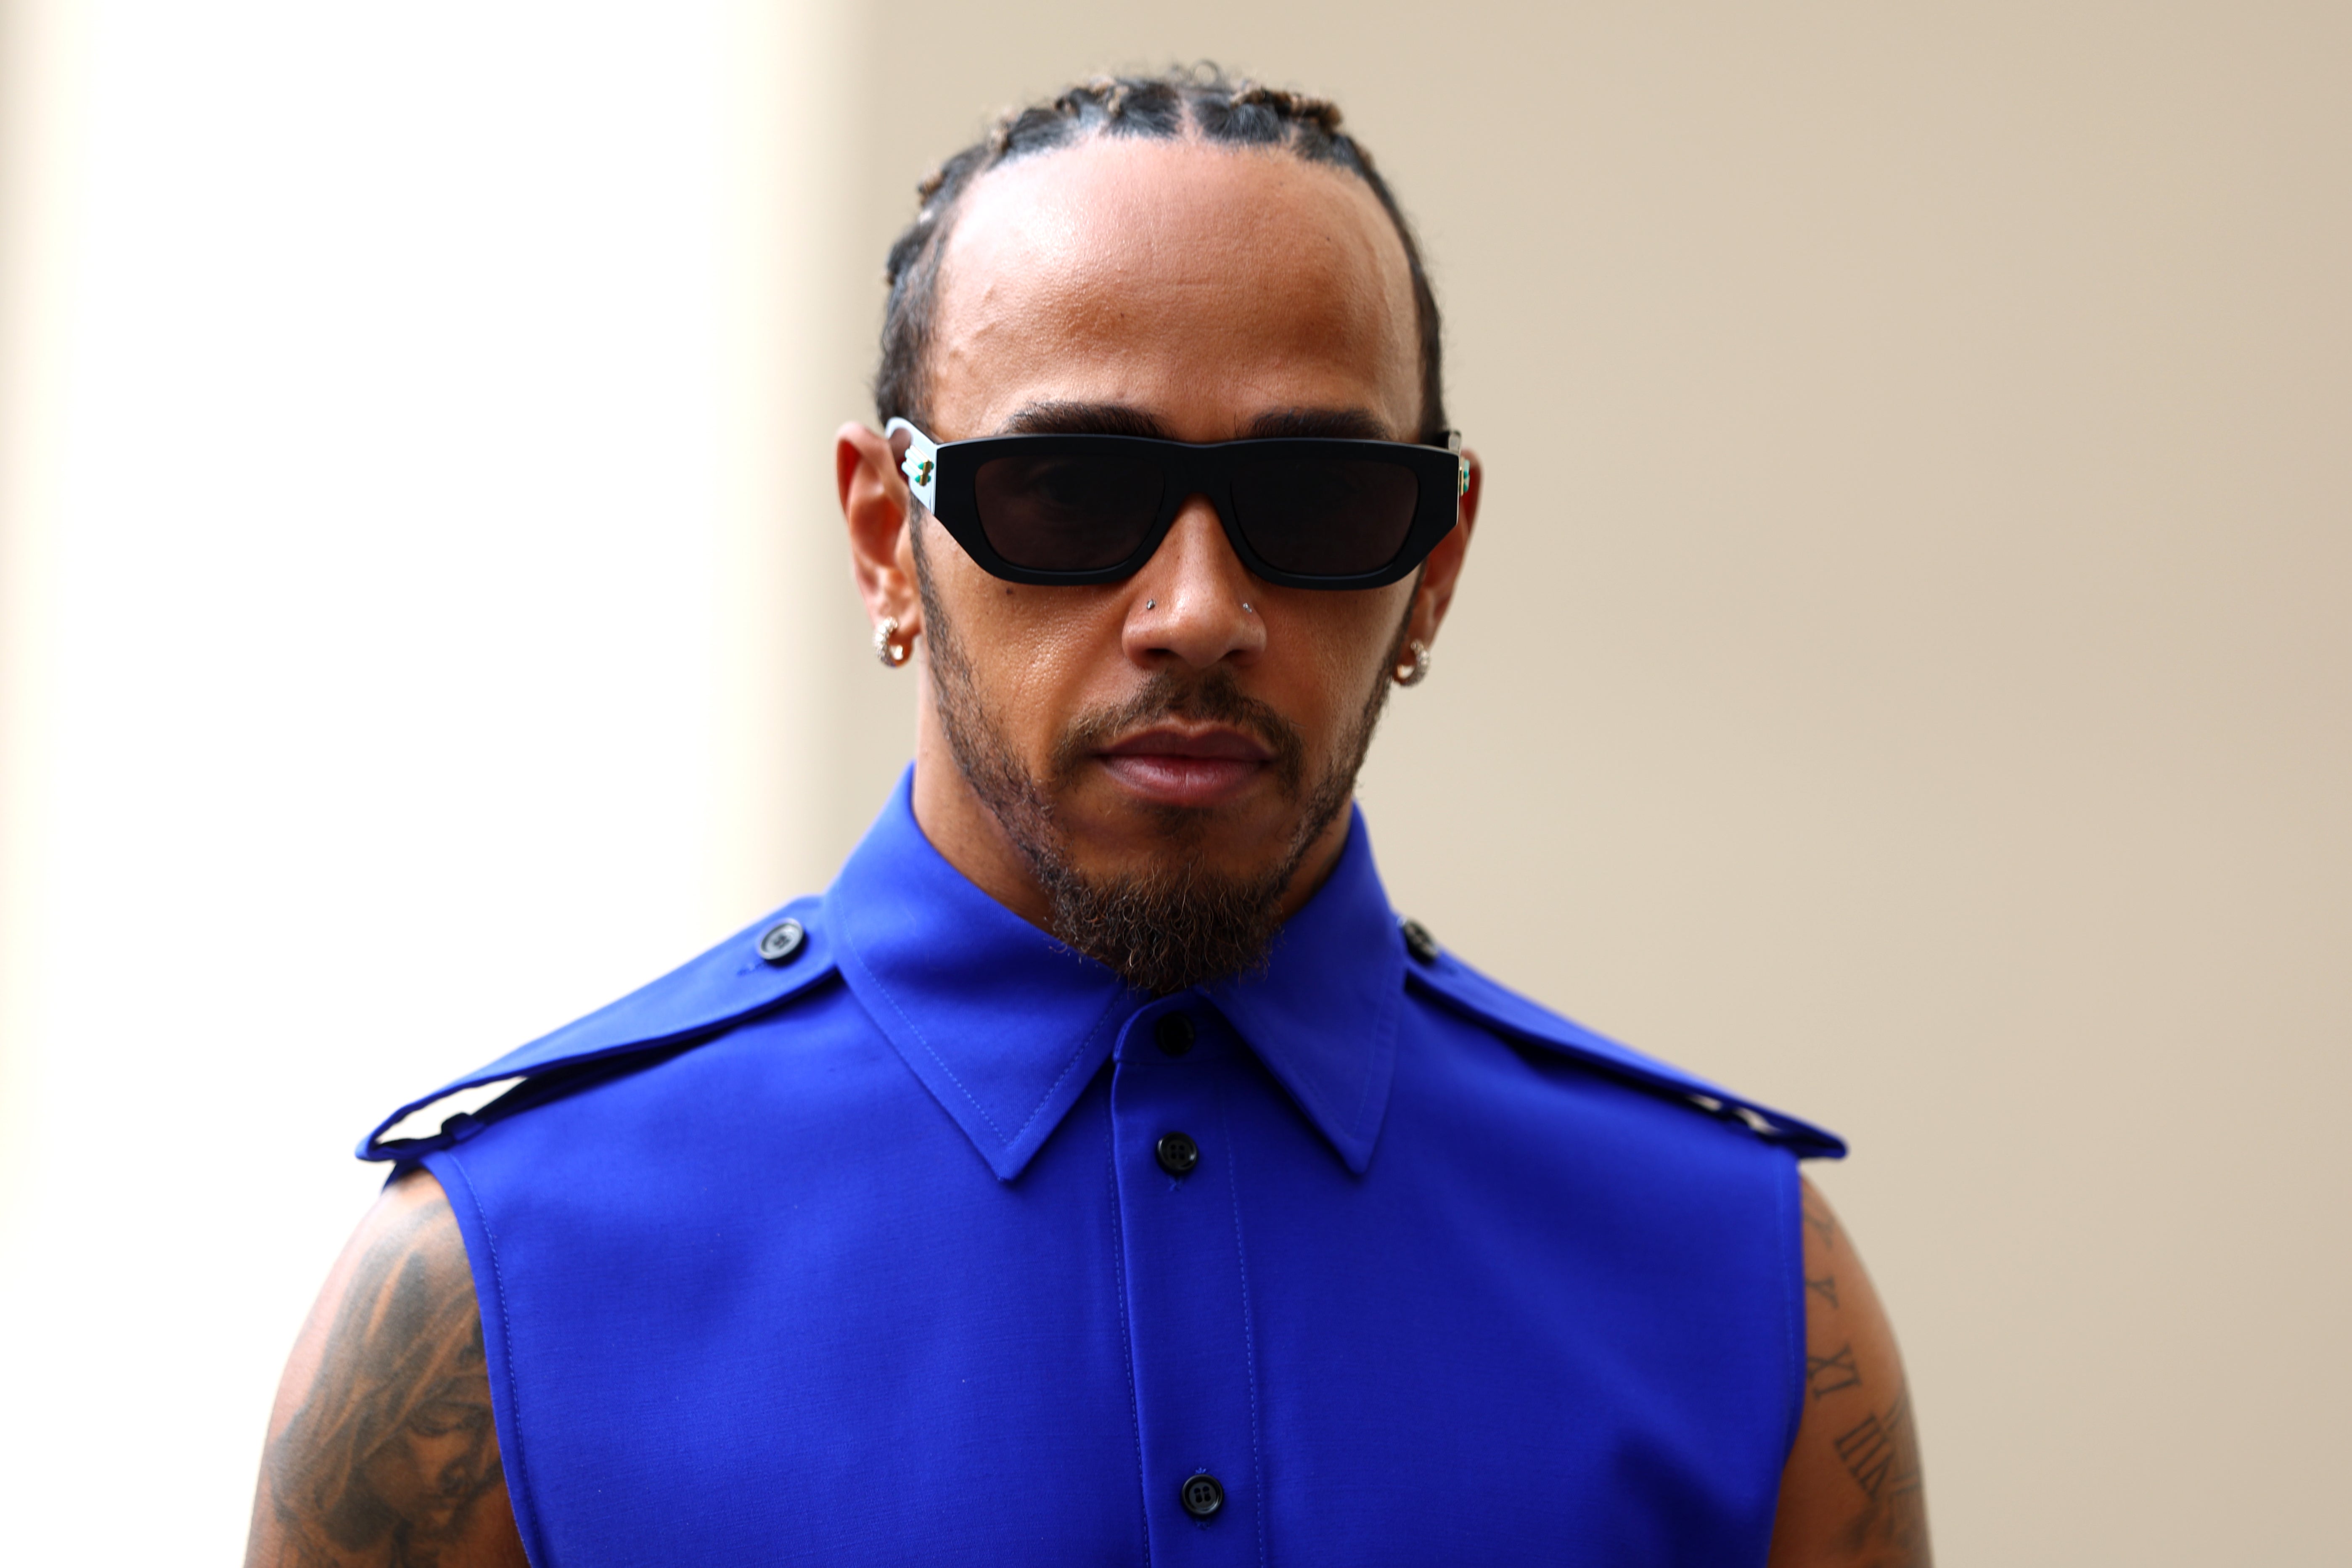 Lewis Hamilton has branded behaviour from the FIA as ‘unacceptable’